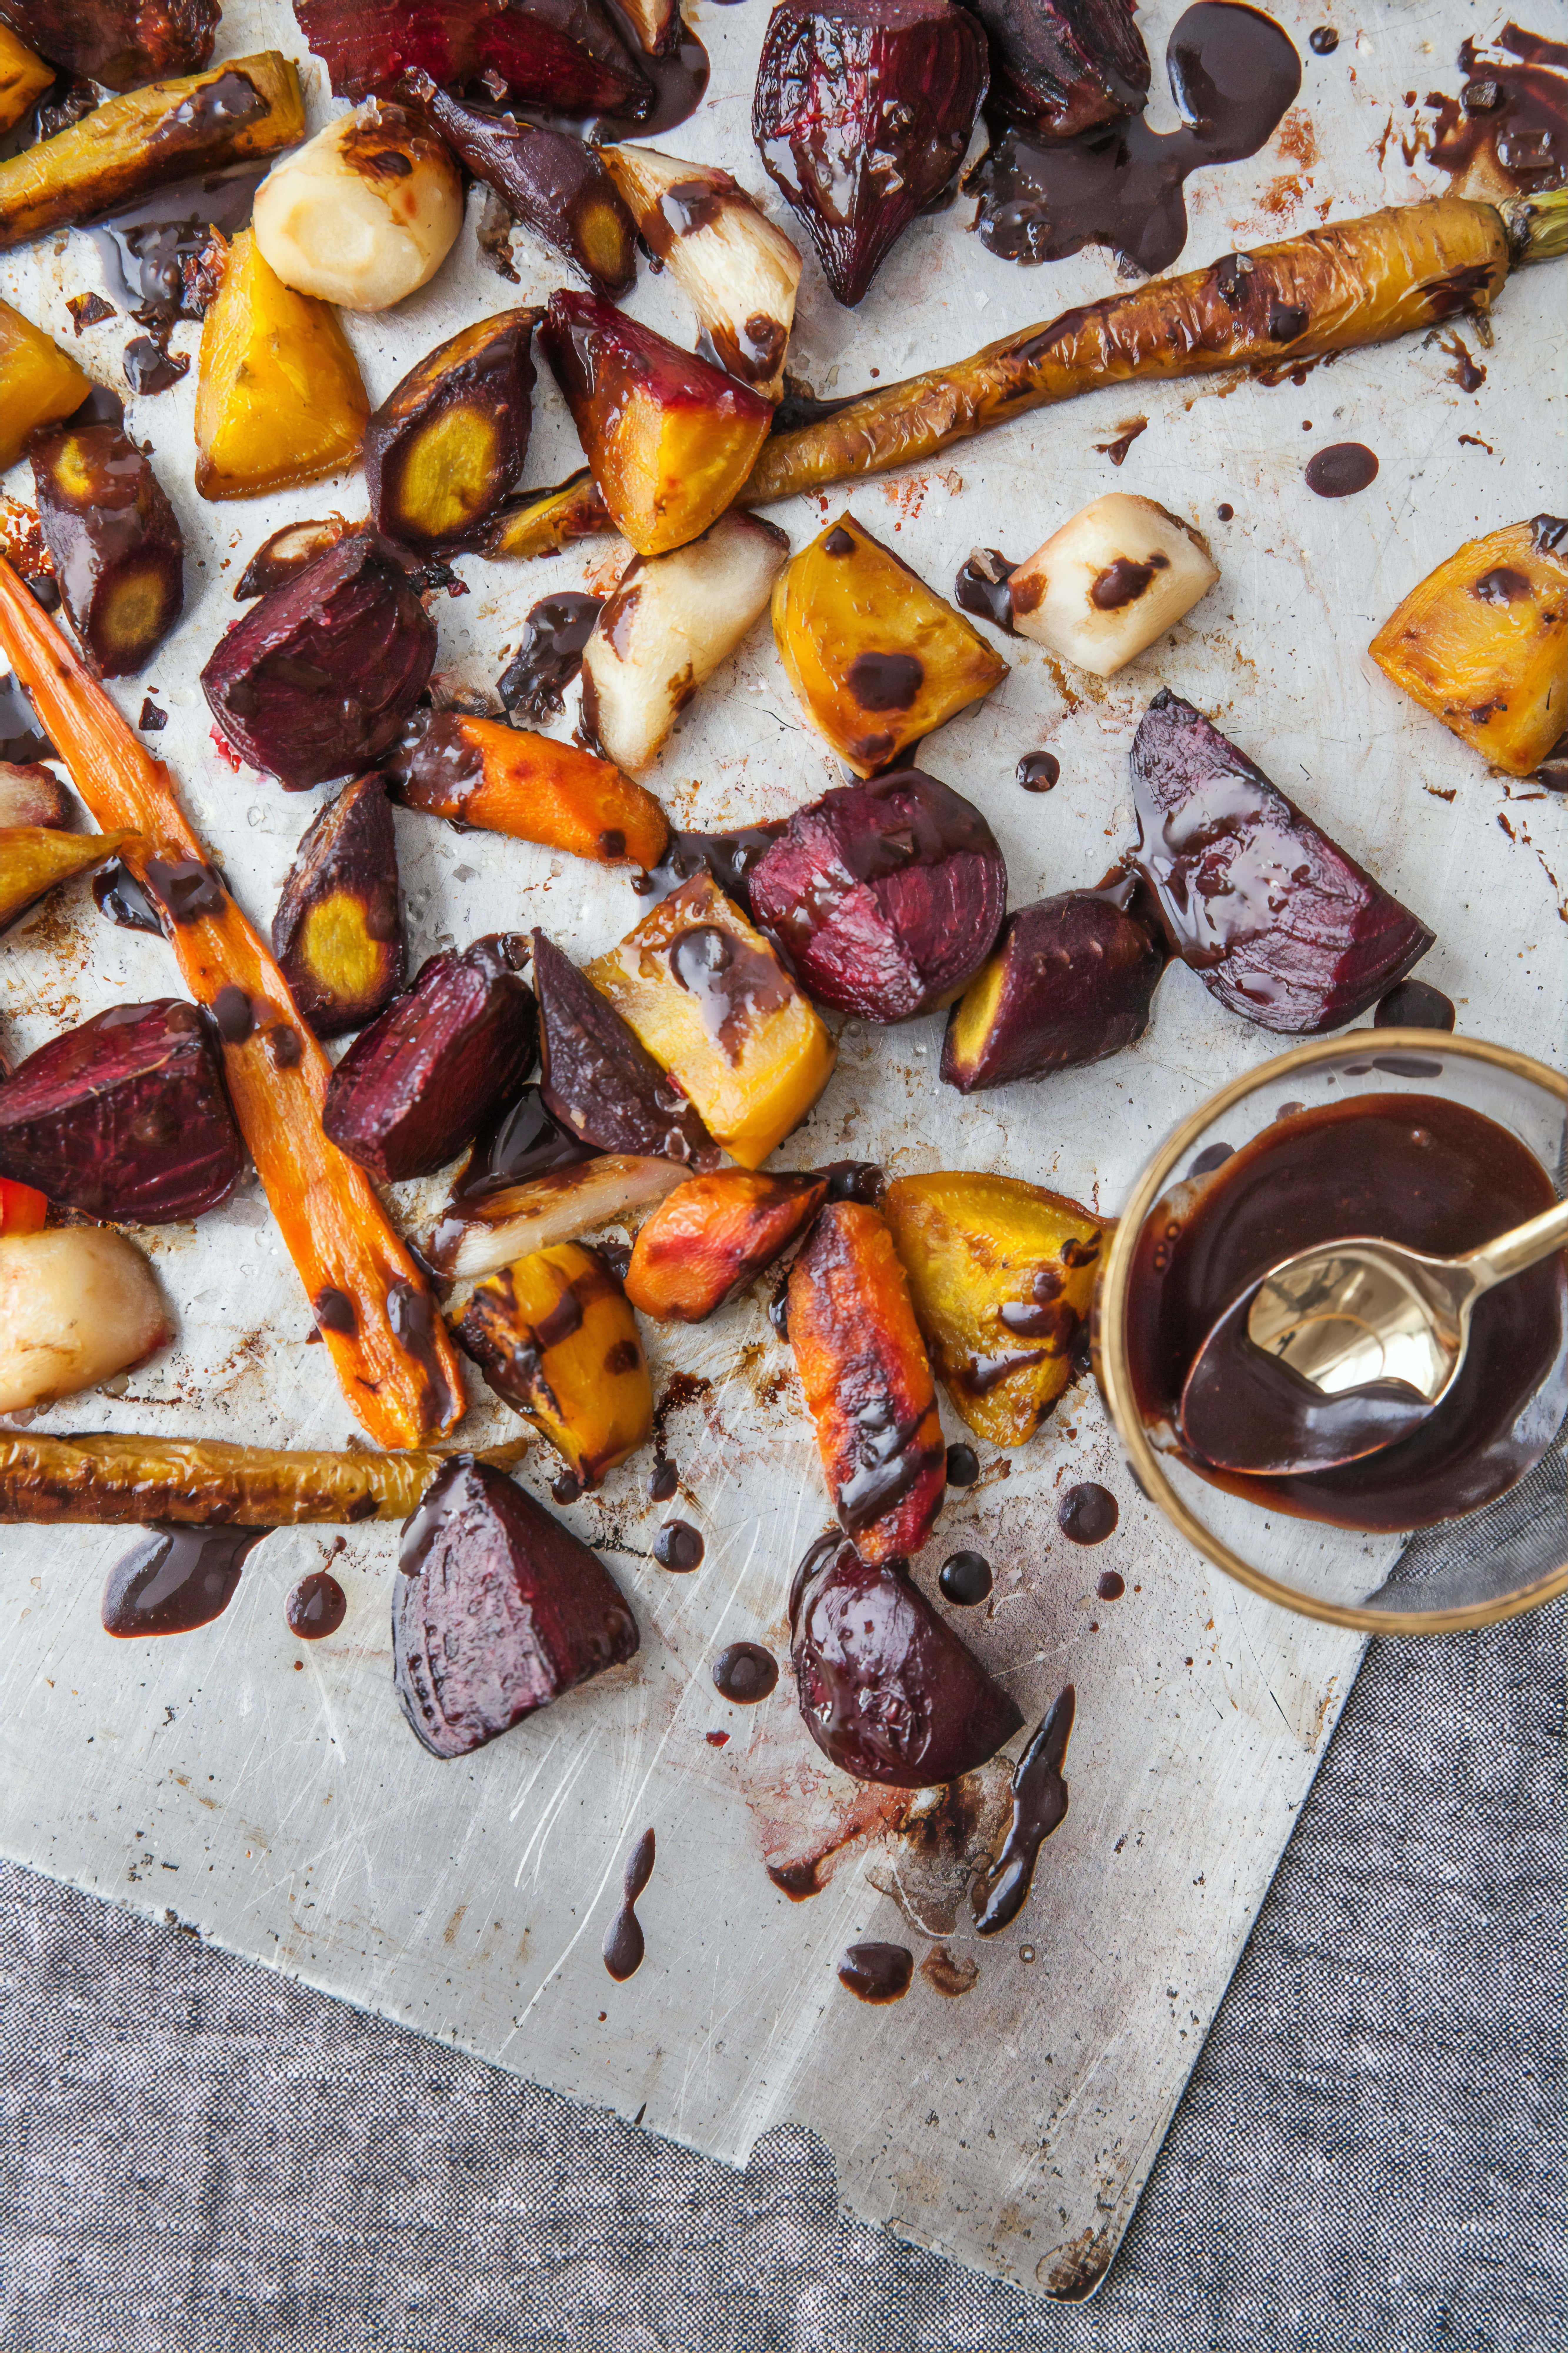 An image of roast vegetables with essential seasoning and spices from World of Spice.